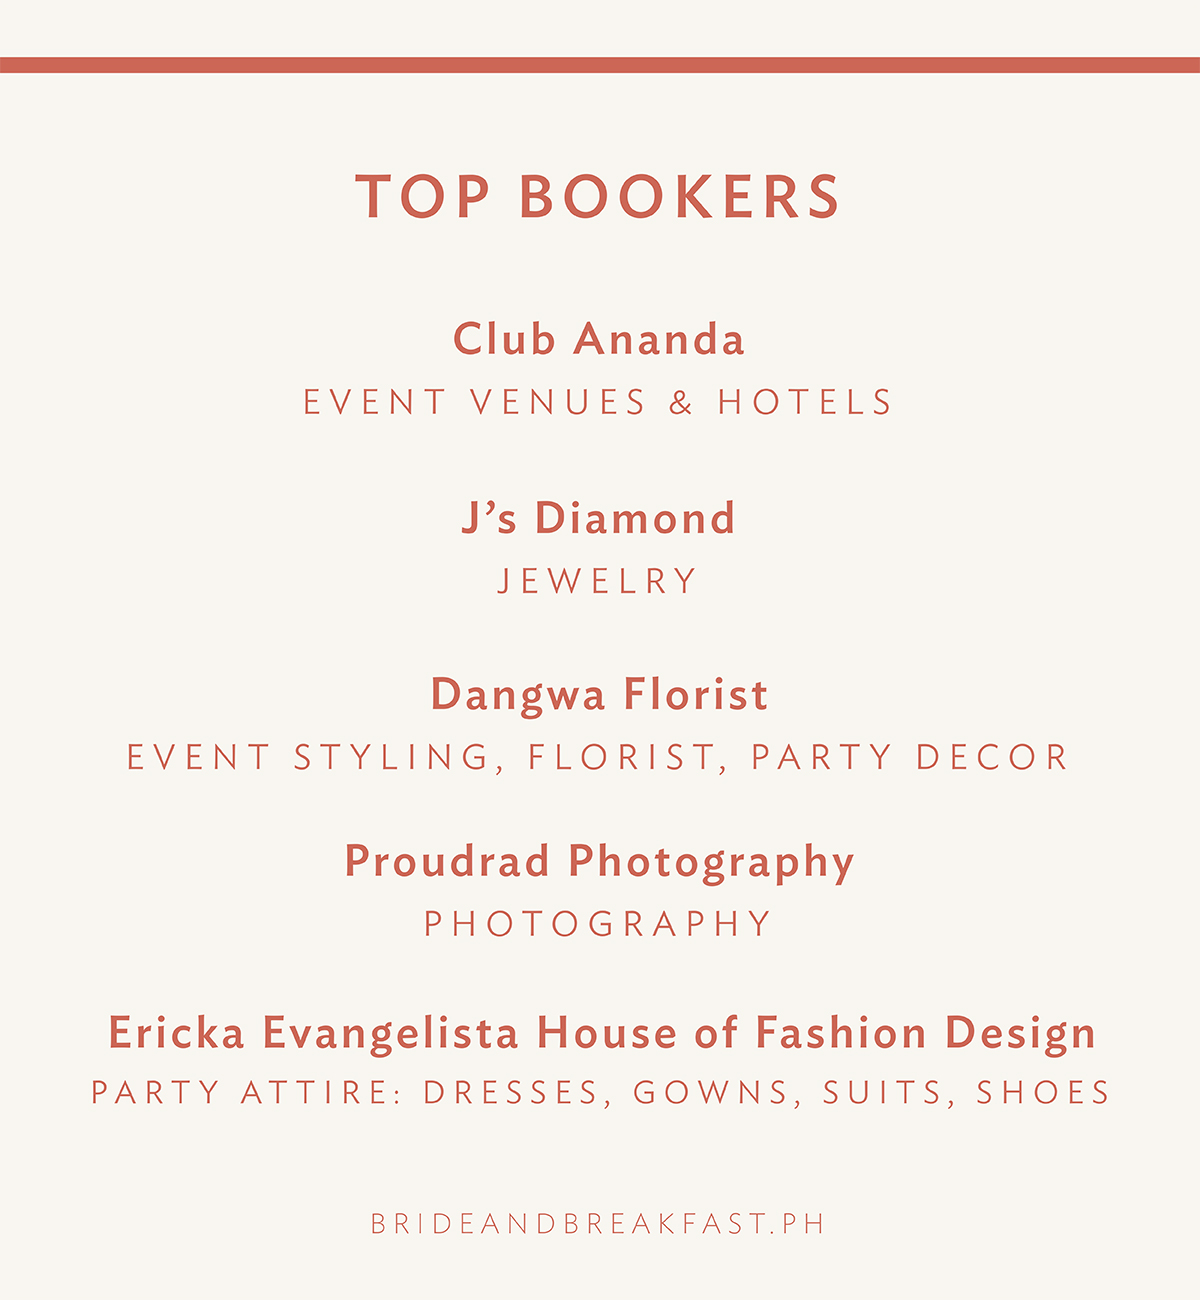 Club Ananda EVENT VENUES & HOTELS J’s Diamond JEWELRY Dangwa Florist EVENT STYLING, FLORIST, PARTY DECOR Proudrad Photography PHOTOGRAPHY Ericka Evangelista House of Fashion Design PARTY ATTIRE: DRESSES, GOWNS, SUITS, SHOES